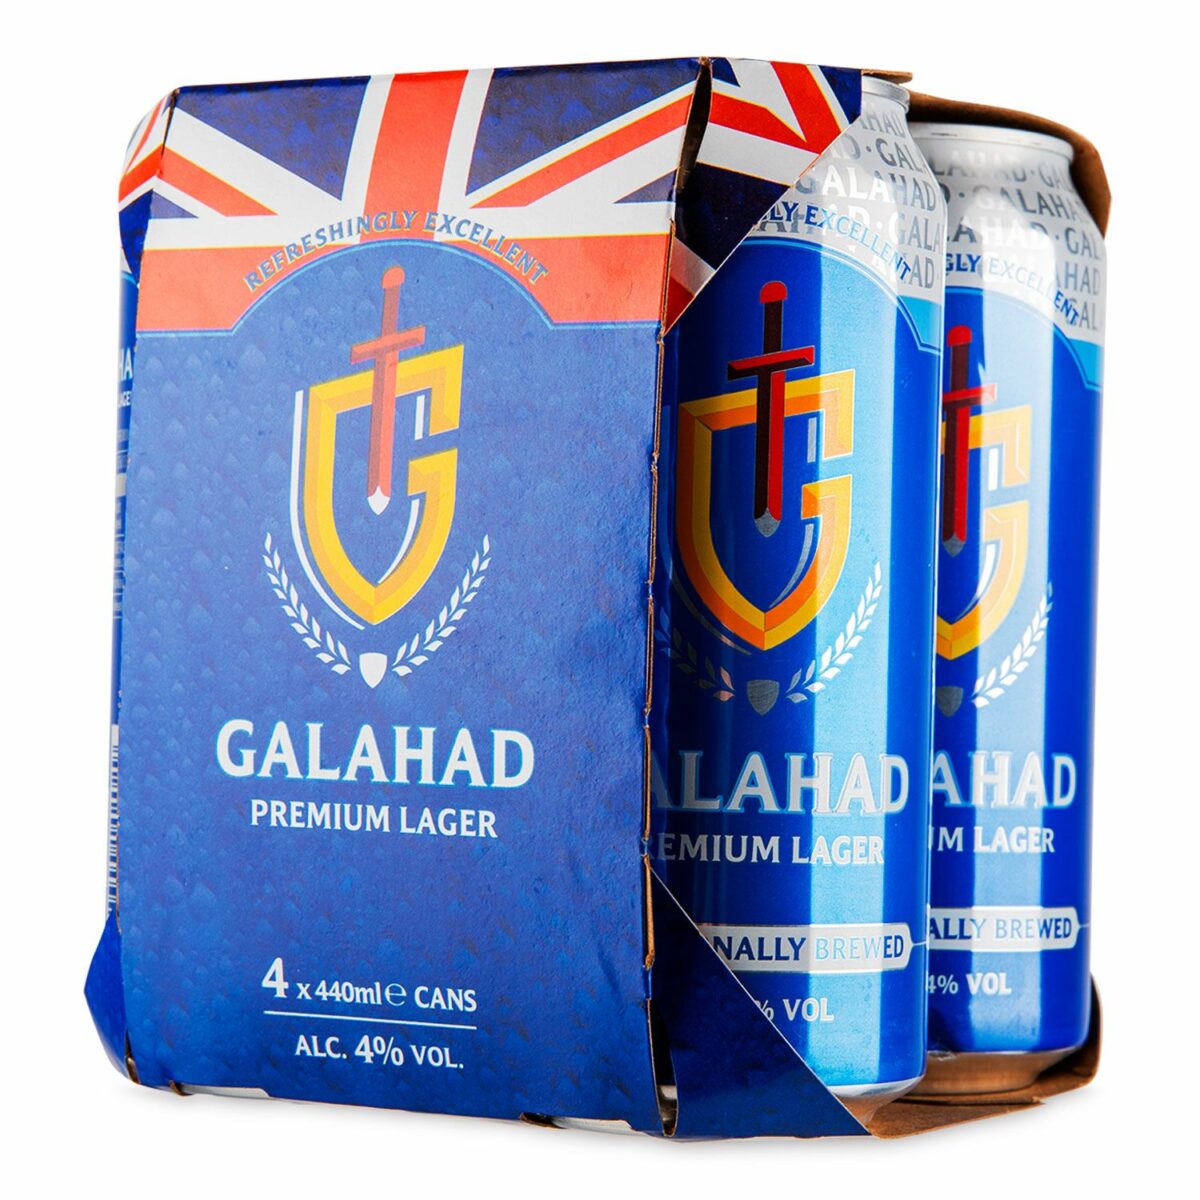 Set of Galahad beer. In its latest marketing ploy, Aldi is offering free beer to help replace the 4.6 million pints of beer that get lost every time Gareth Southgate's team score a goal.